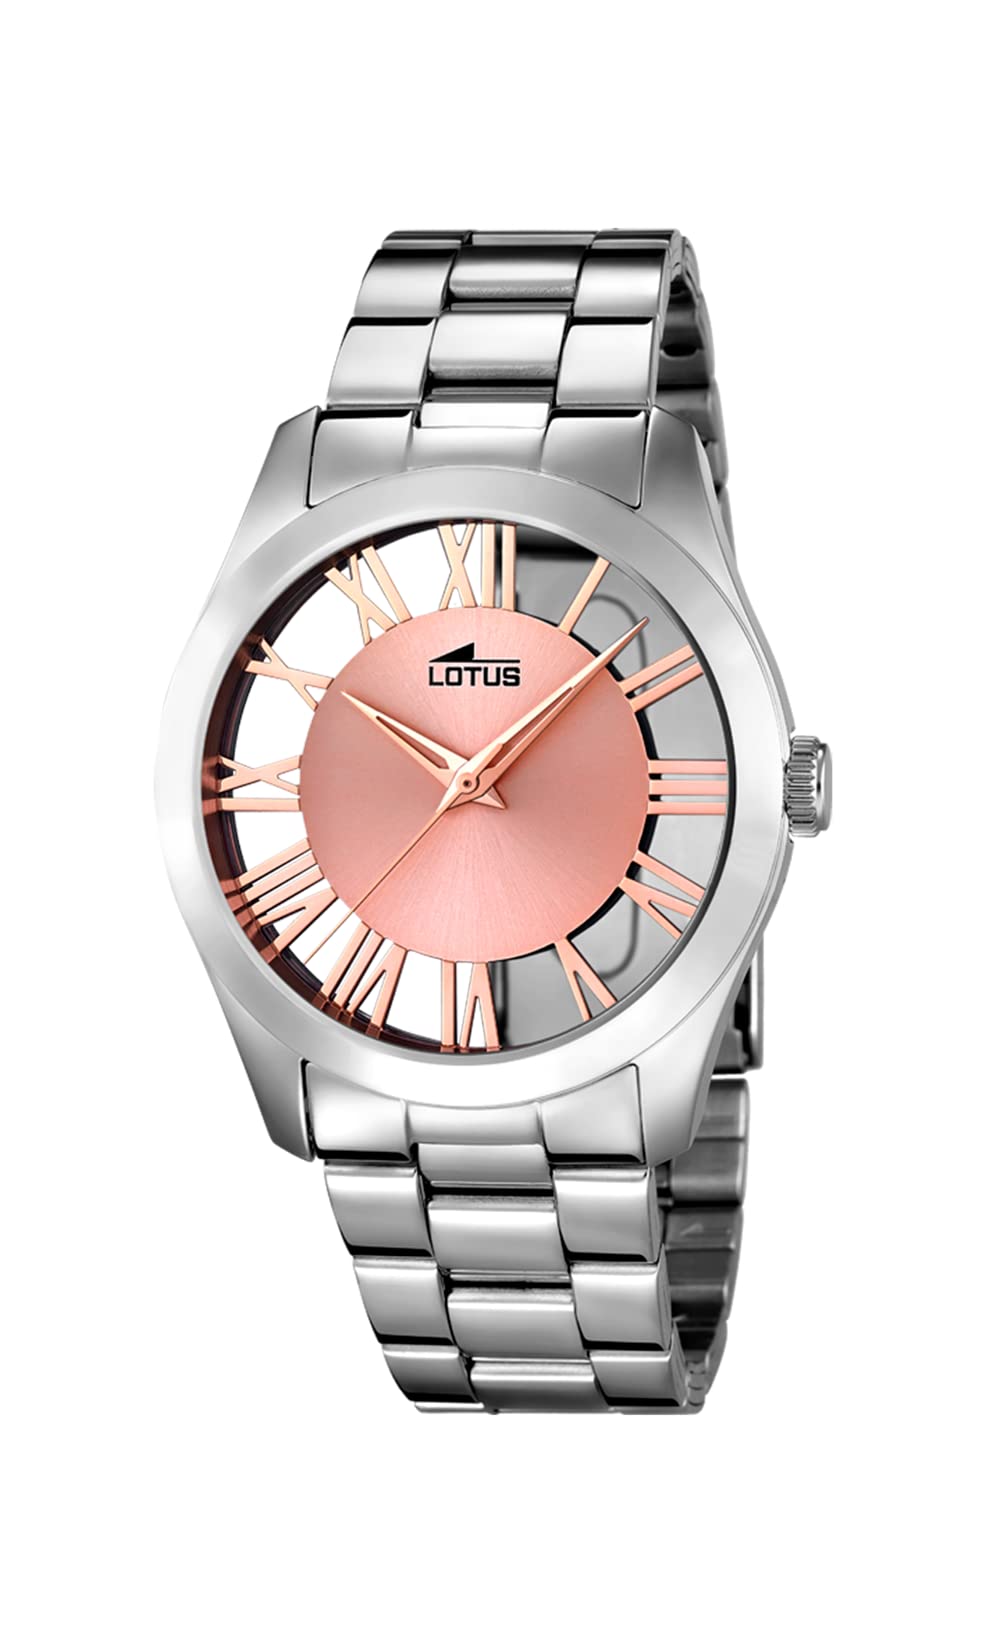 Lotus Women's Year-Round Quartz Watch with Stainless Steel Strap, Silver, 18 (Model: 18122/1)